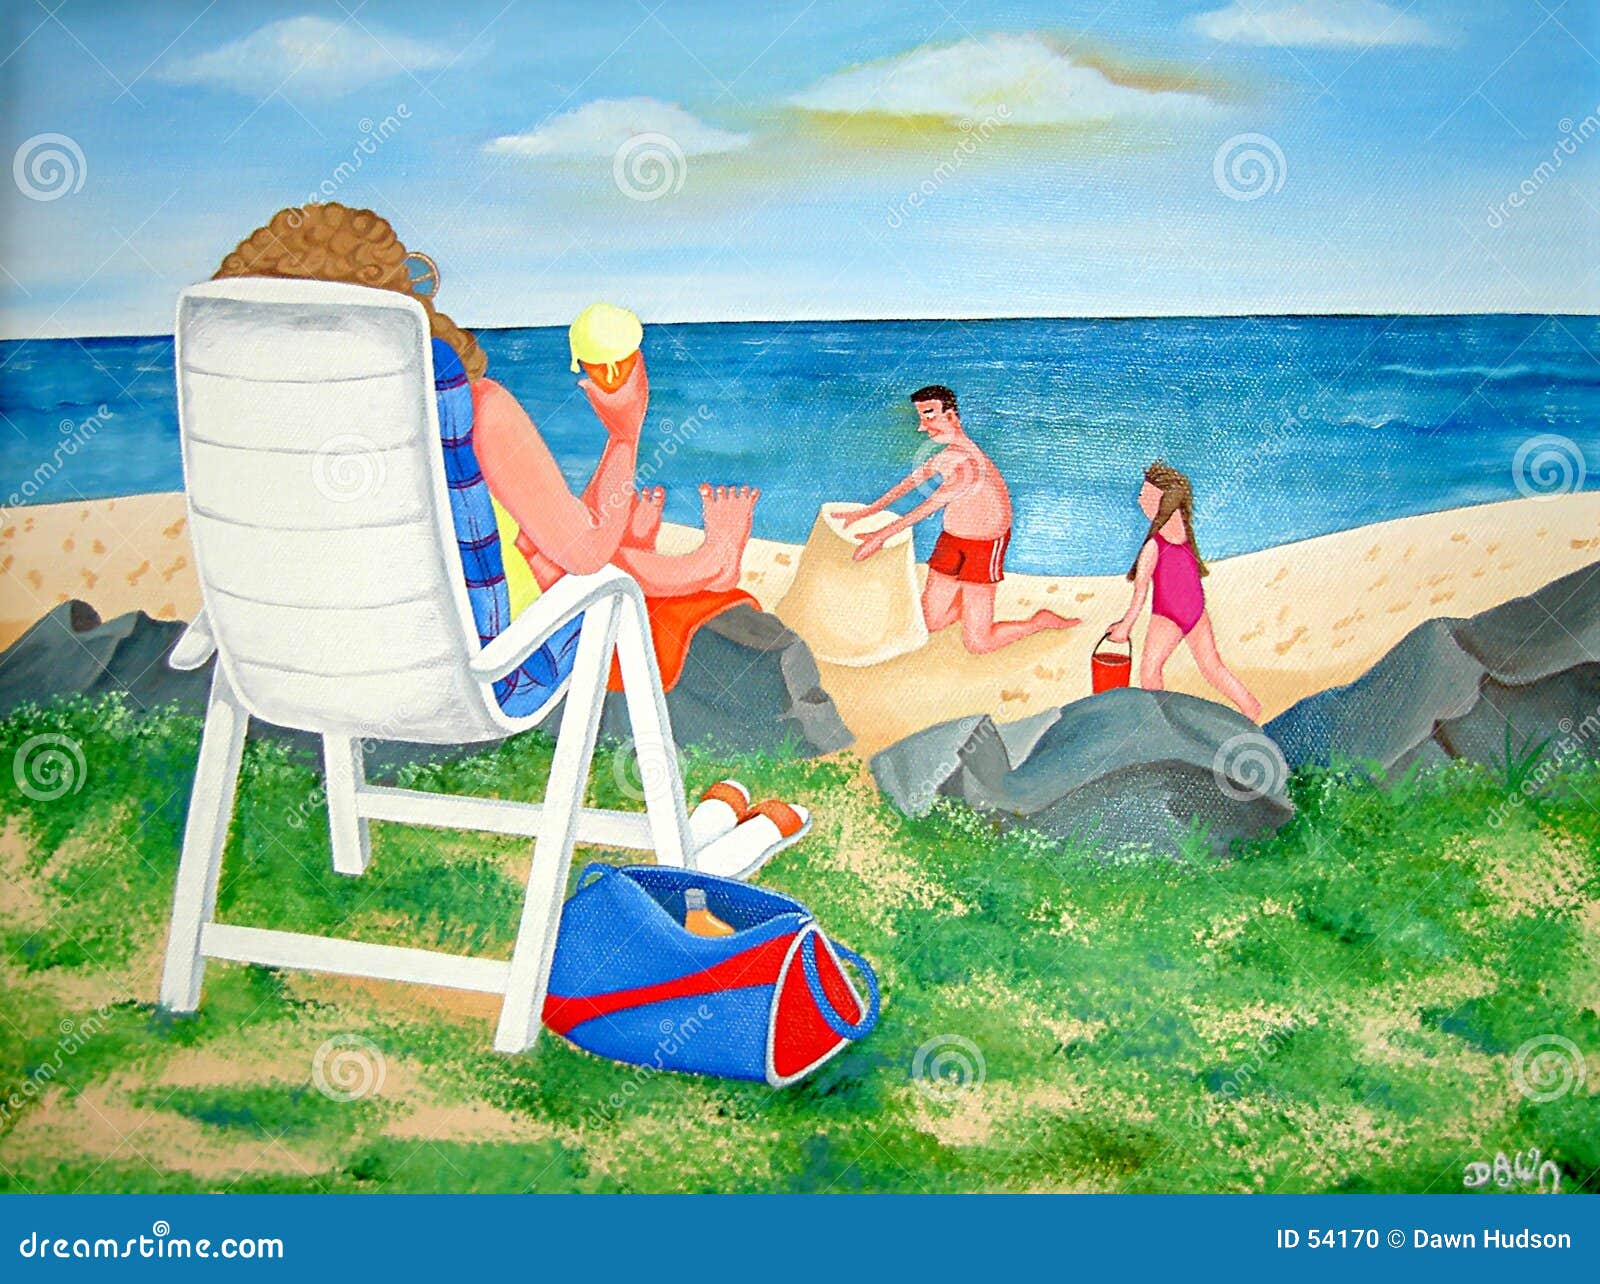 clipart family at the beach - photo #36